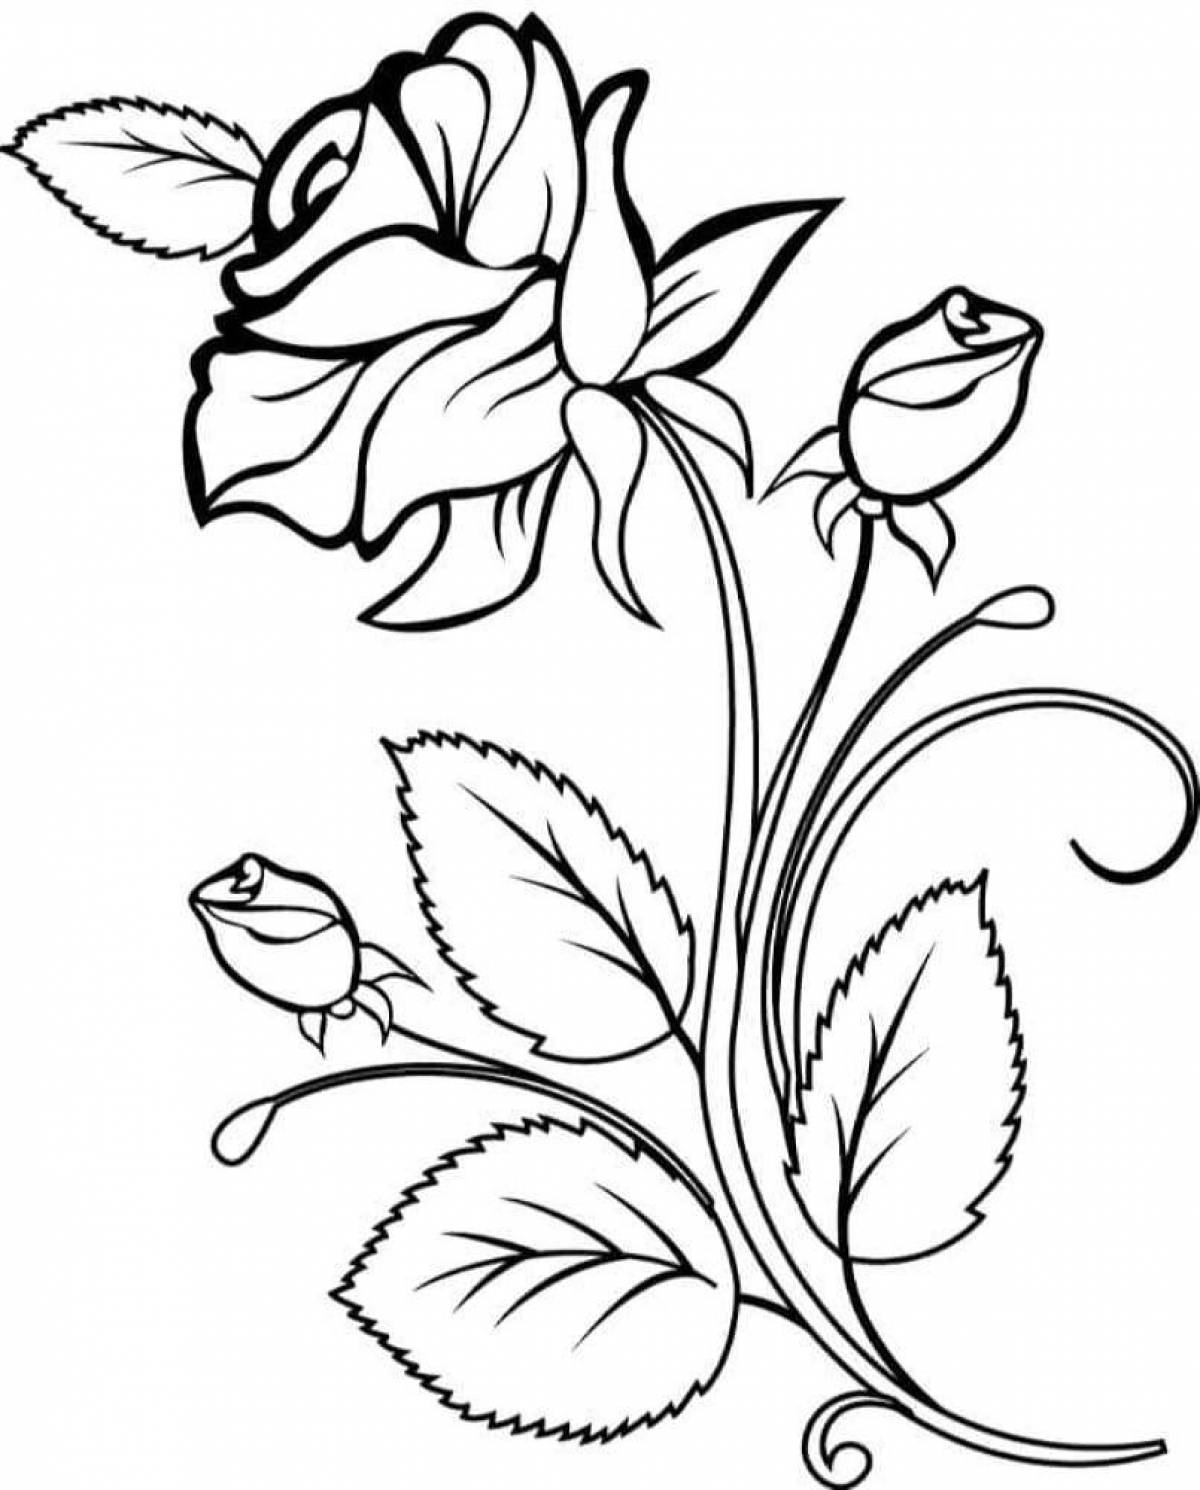 Dazzling coloring page bright flowers